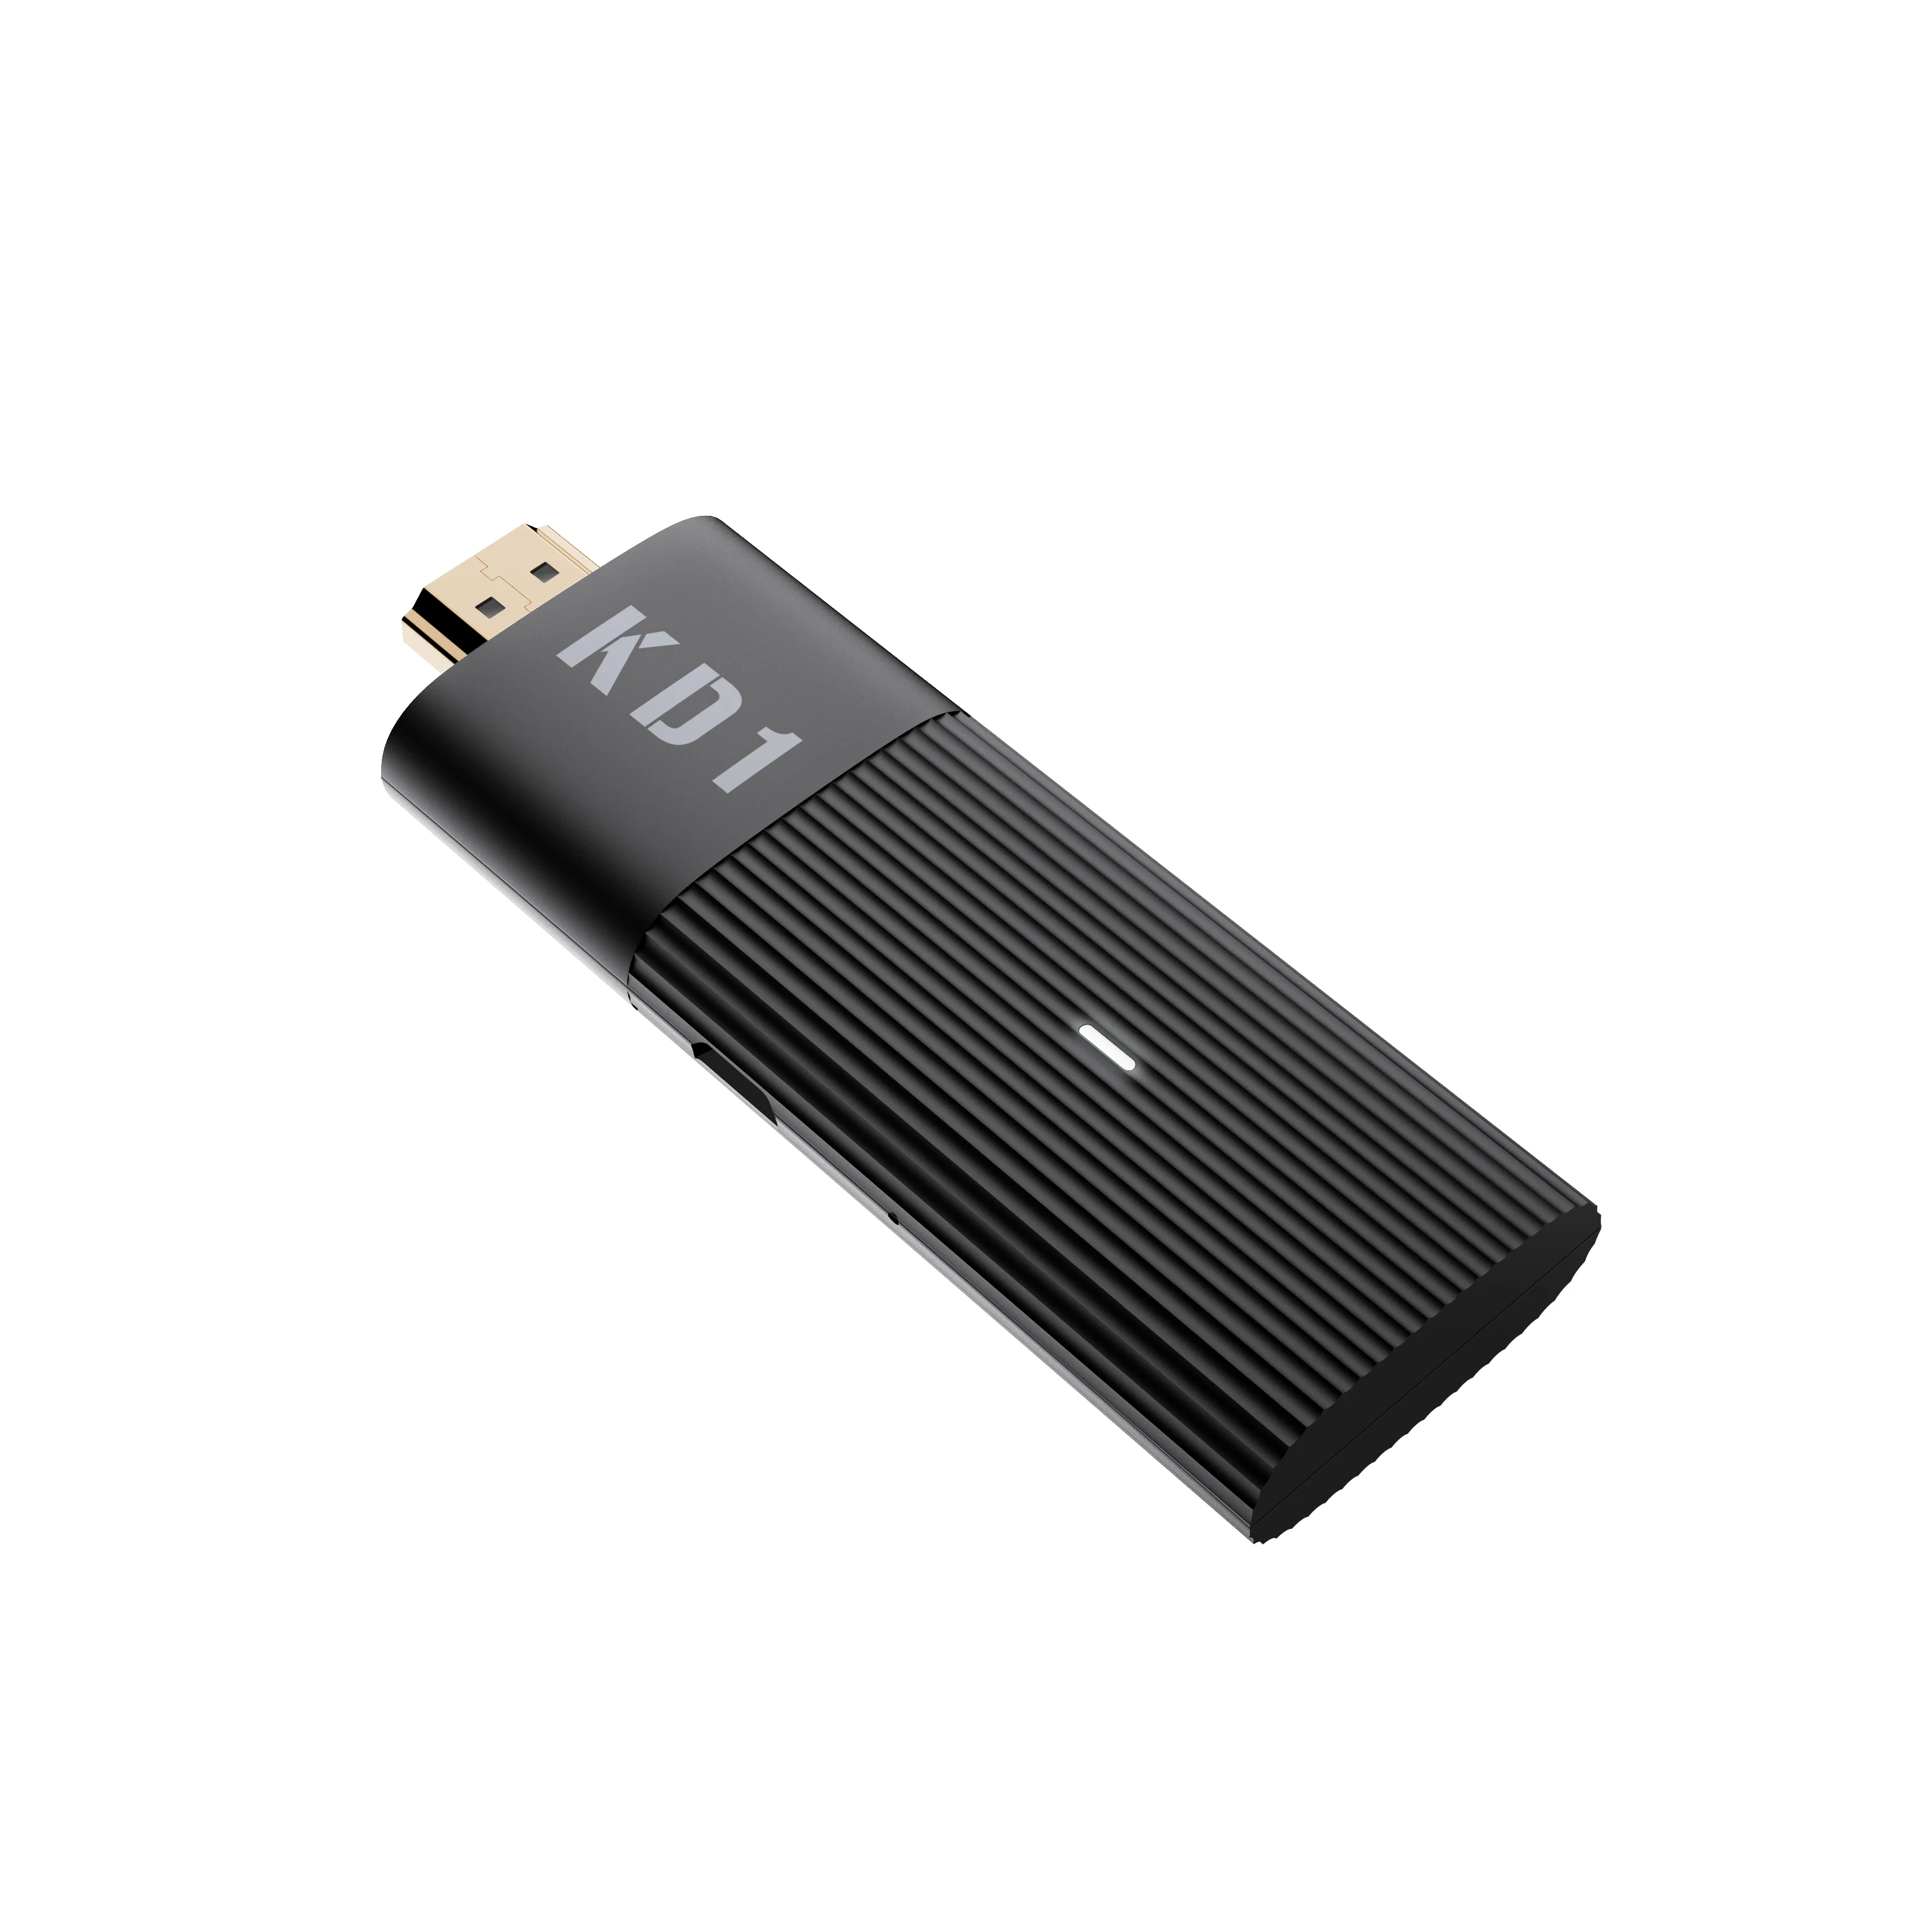 

MECOOL KD1 TV Dongle Amlogic S905Y2 2GB 16GB Android 10.0 BT4.2 2.4G/5G WiFi Smart TV Dongle Stick